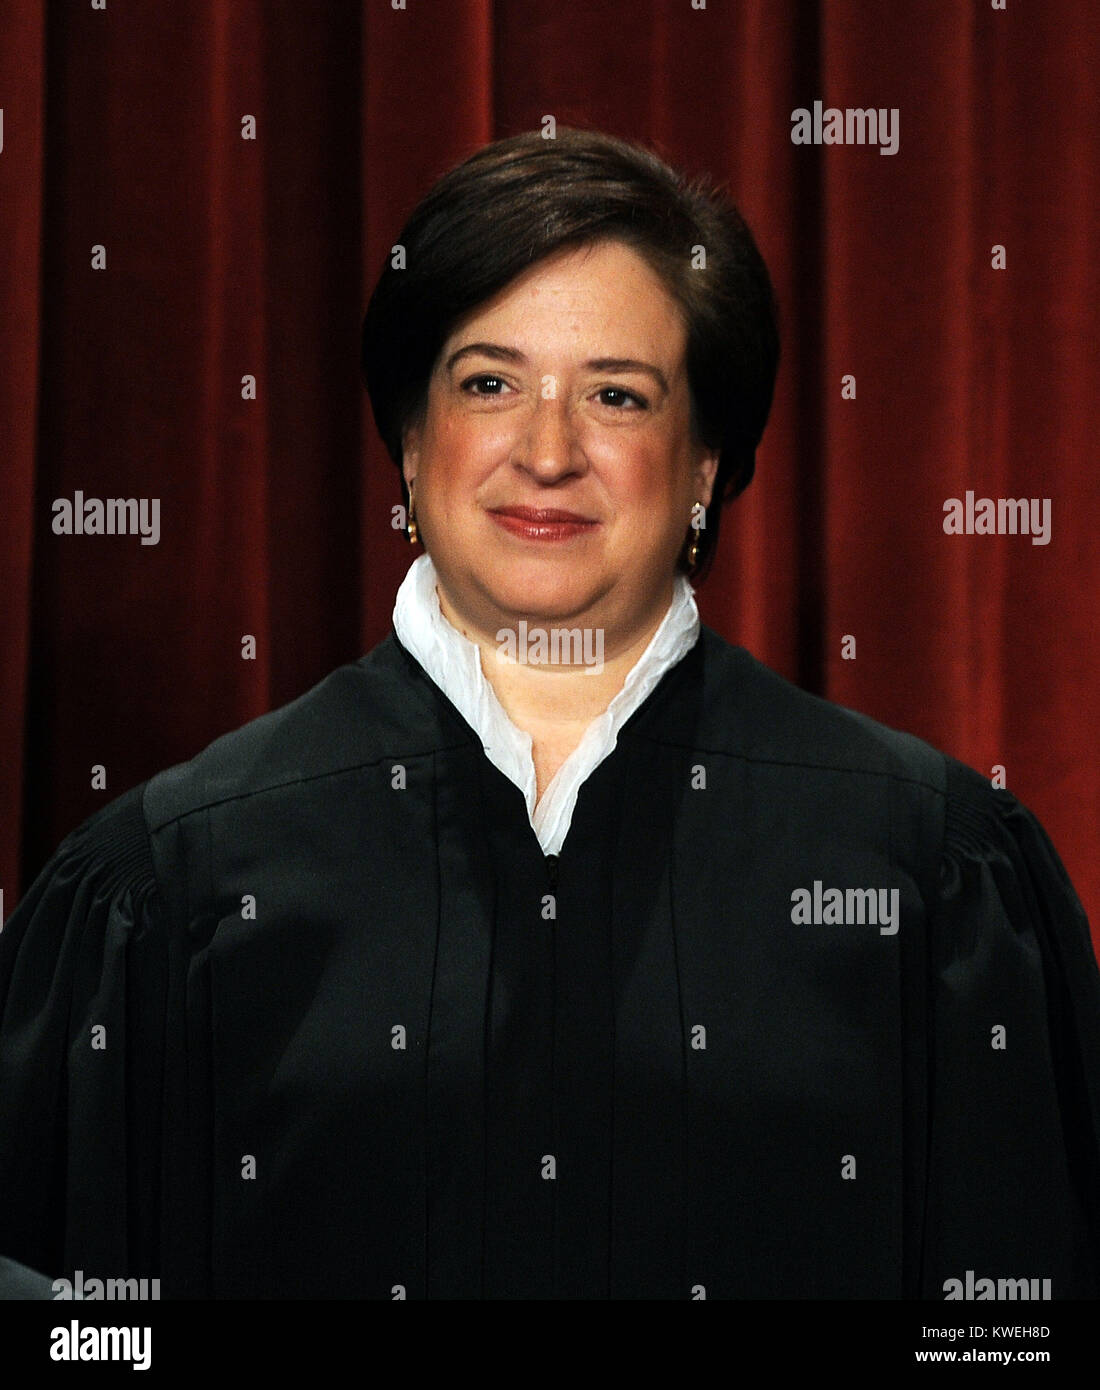 Associate Justice Elena Kagan, the newest member of the Court, and the Supreme Court Justices of the United States sit for a formal group photo in the East Conference Room of the Supreme Court in Washington on Friday, October 8, 2010.   .Credit: Roger L. Wollenberg - Pool via CNP /MediaPunch Stock Photo